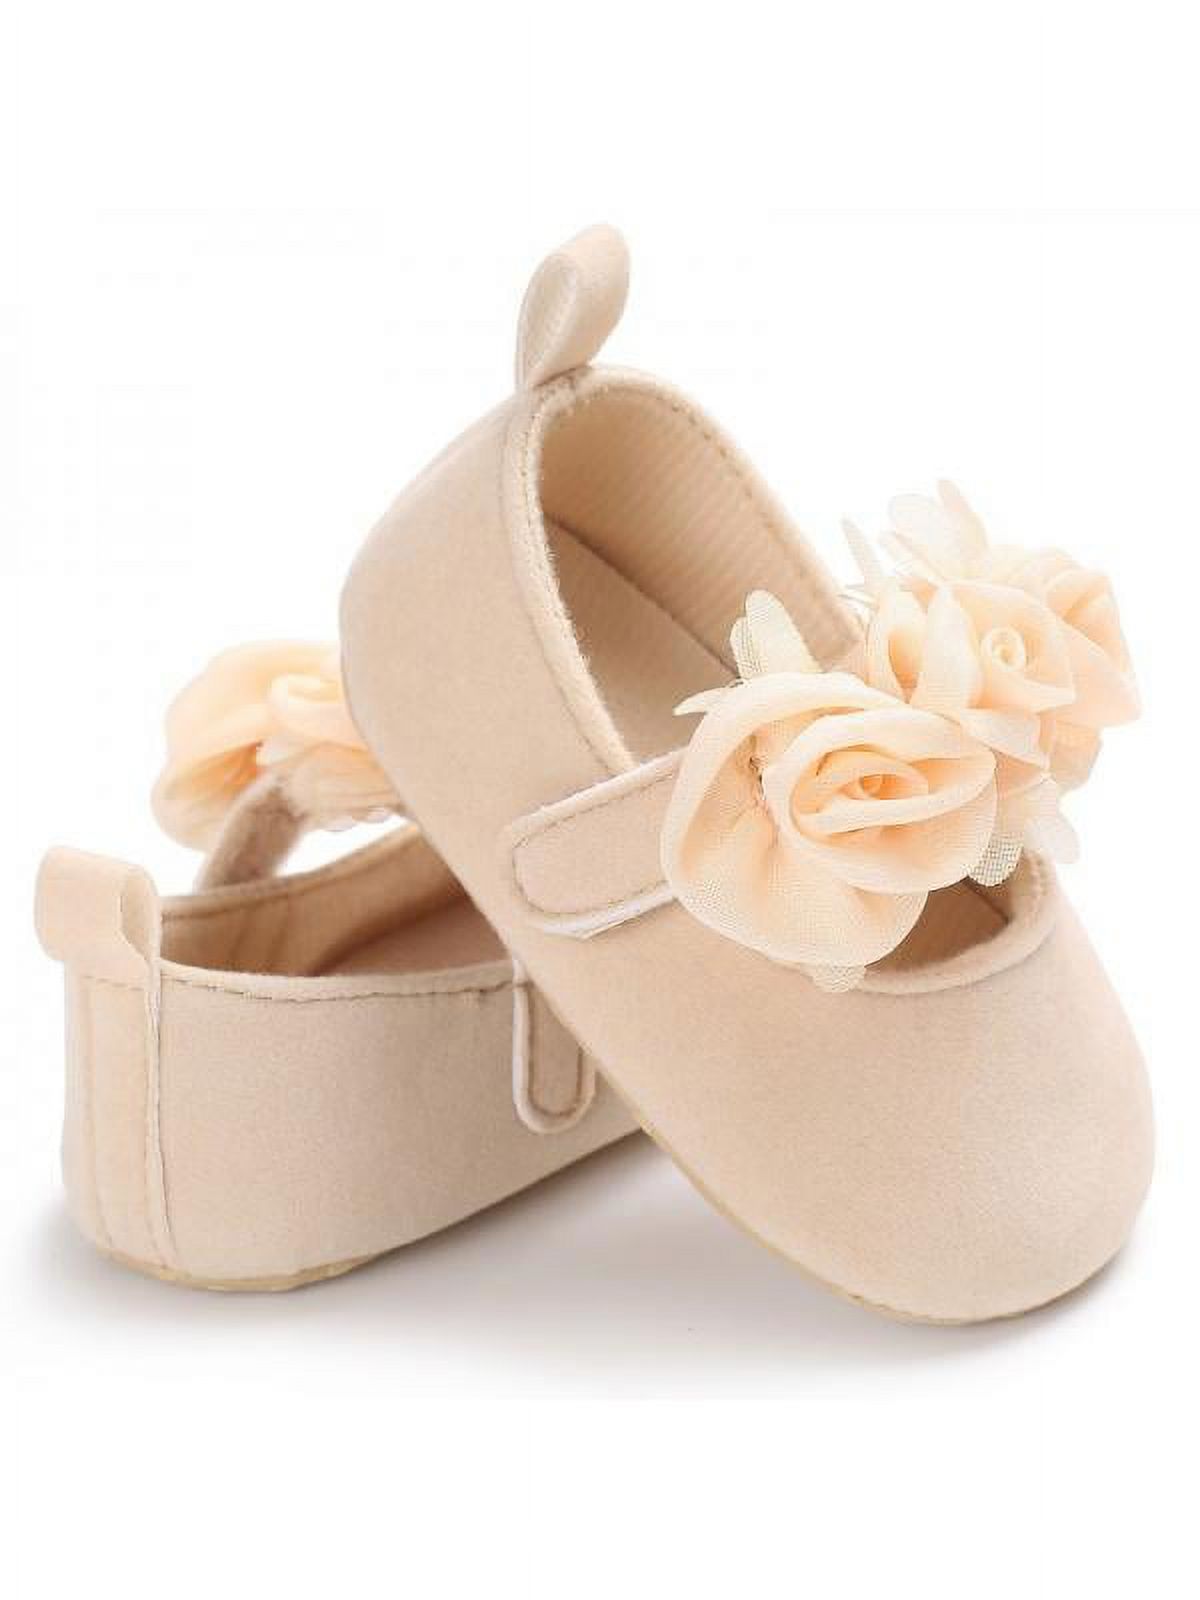 Lovely Kid Girls Princess Shoes Flowers Dance Shoes Suede Ballet Shoes Anti-slip Soft Sole Crib Hook & Loop Shoes (Toddler/Little Baby Girls) - image 4 of 7